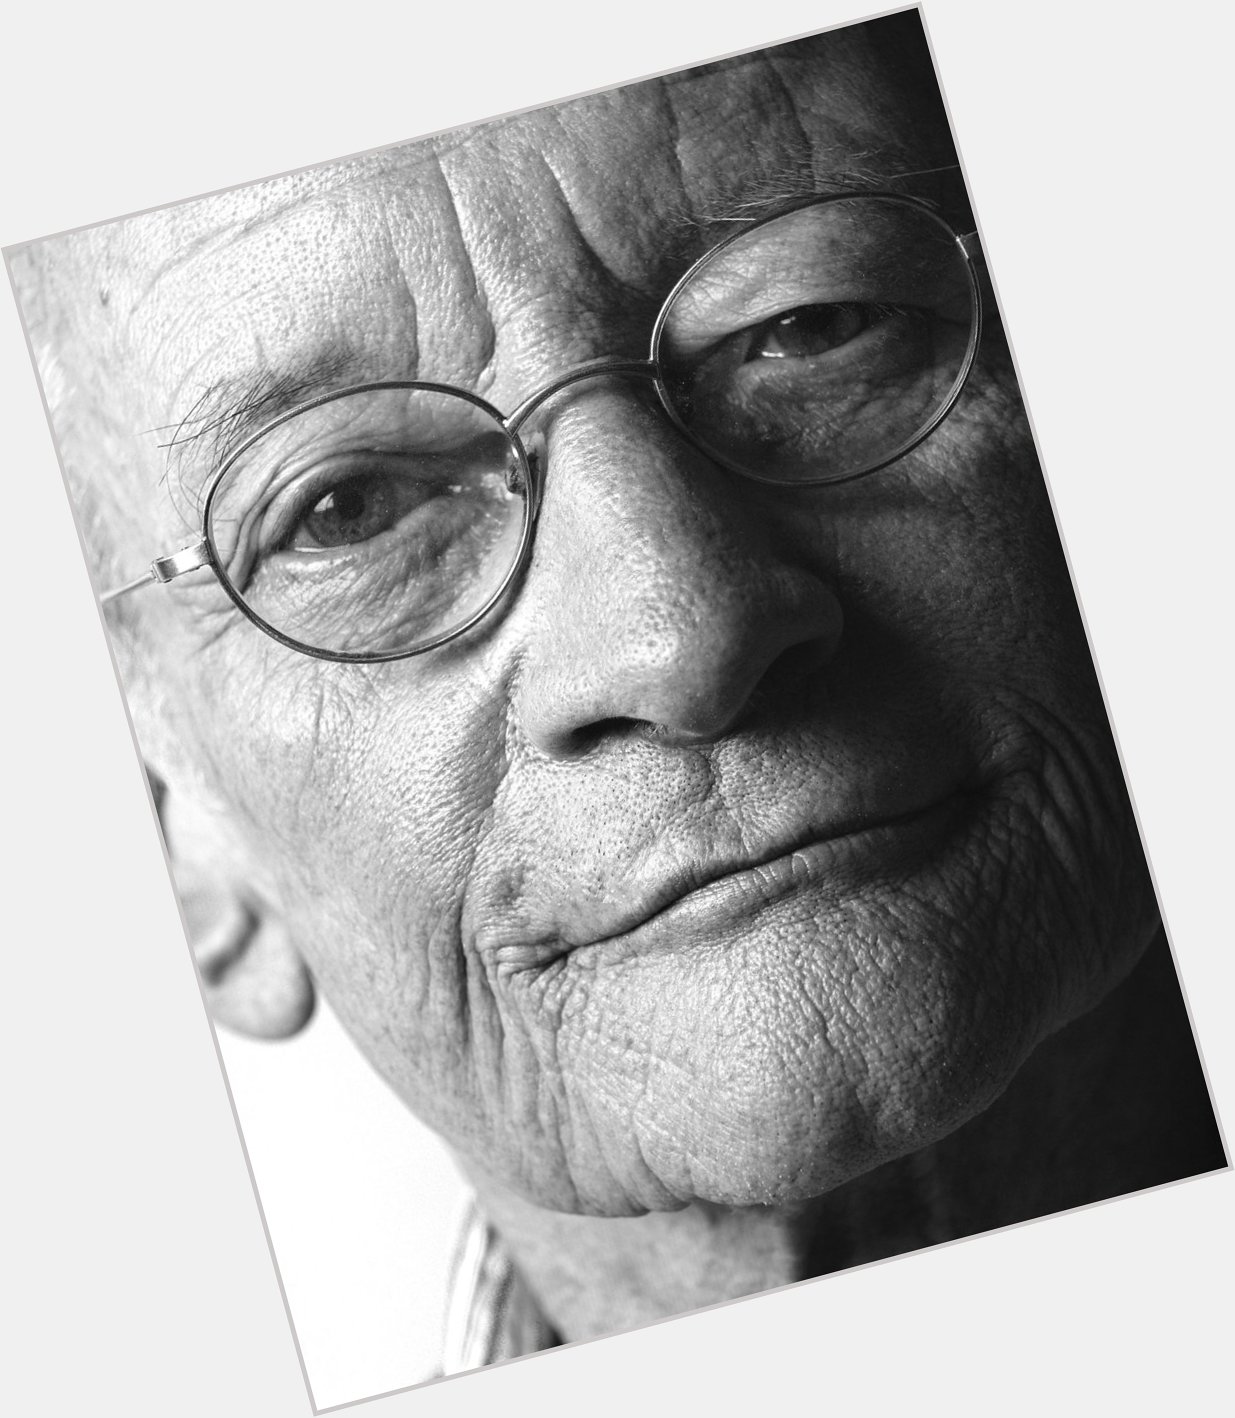 Ted Kooser was Check out his poem Happy Birthday here:  